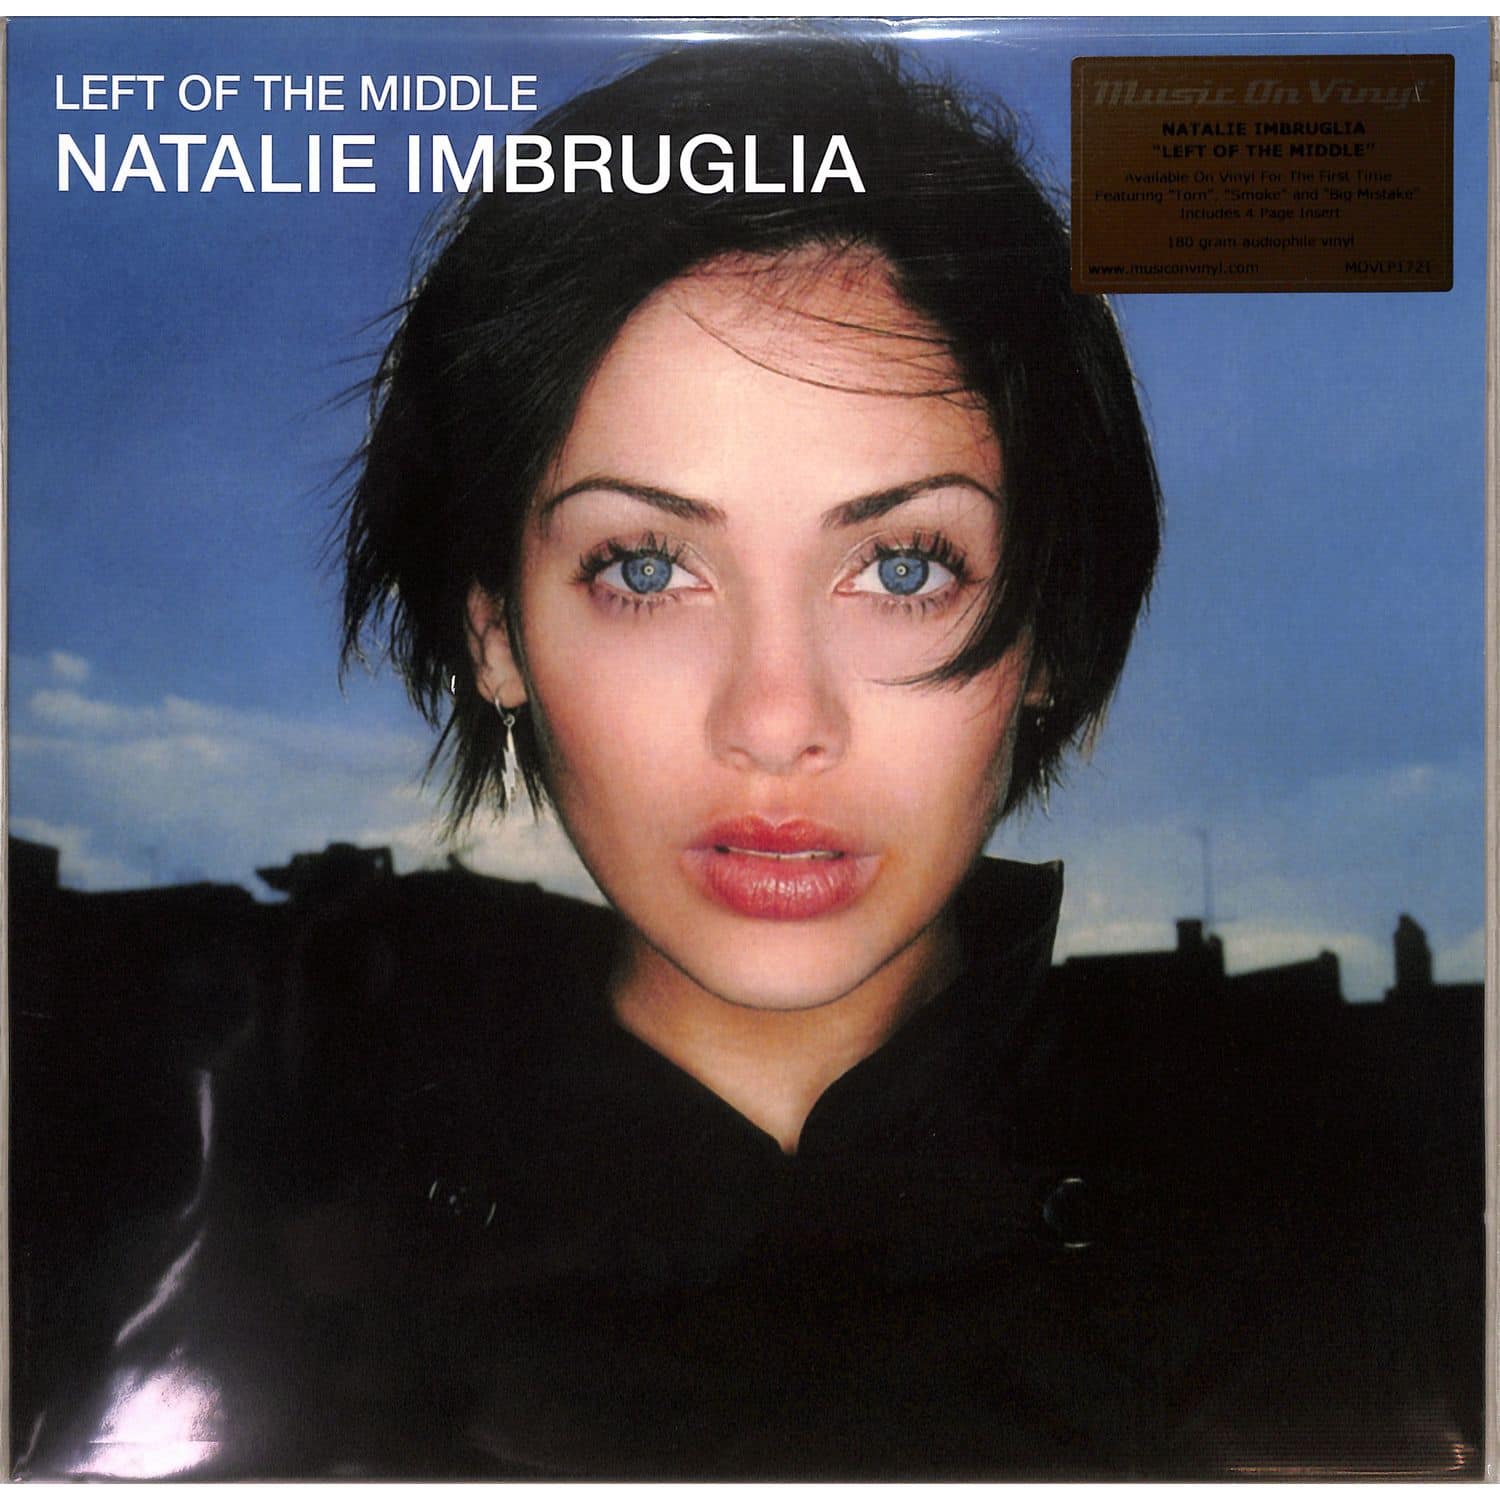 Natalie Imbruglia - LEFT OF THE MIDDLE 